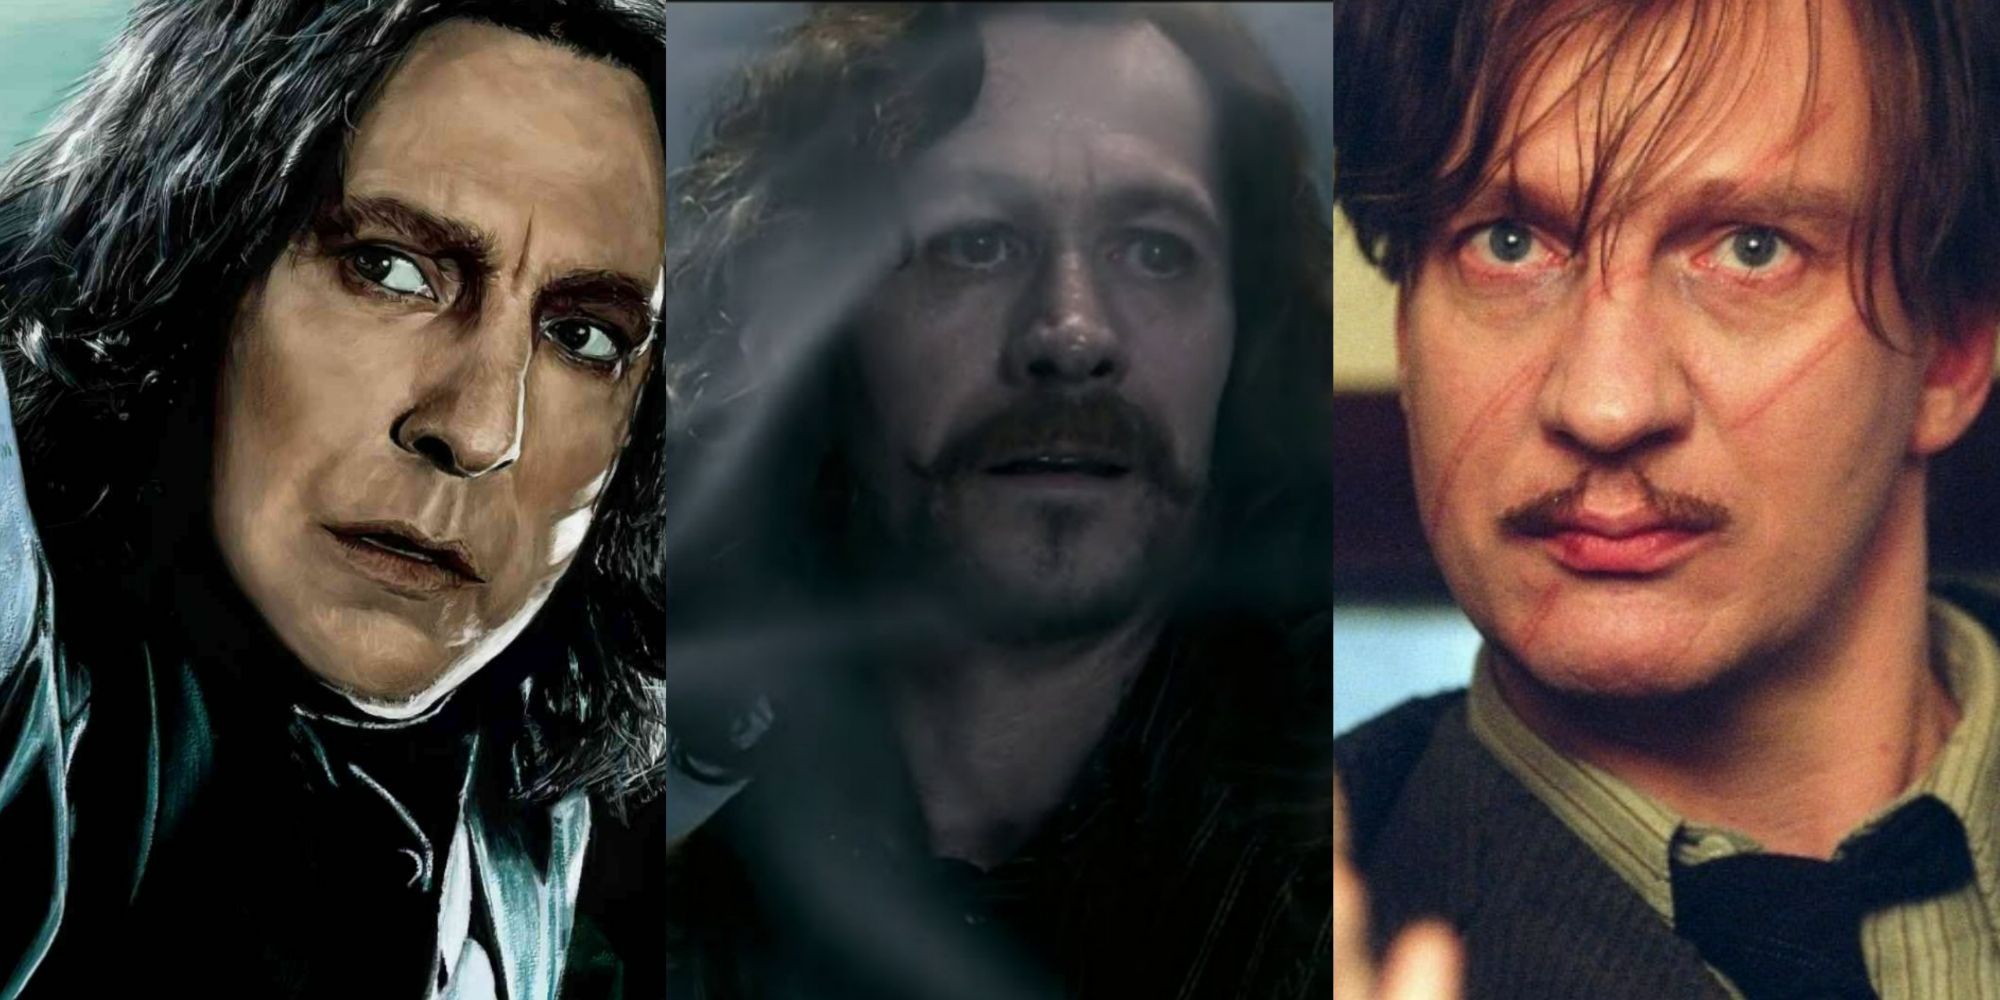 A tri-split image showing, from left to right, Snape, Sirius, and Lupin from Harry Potter. 